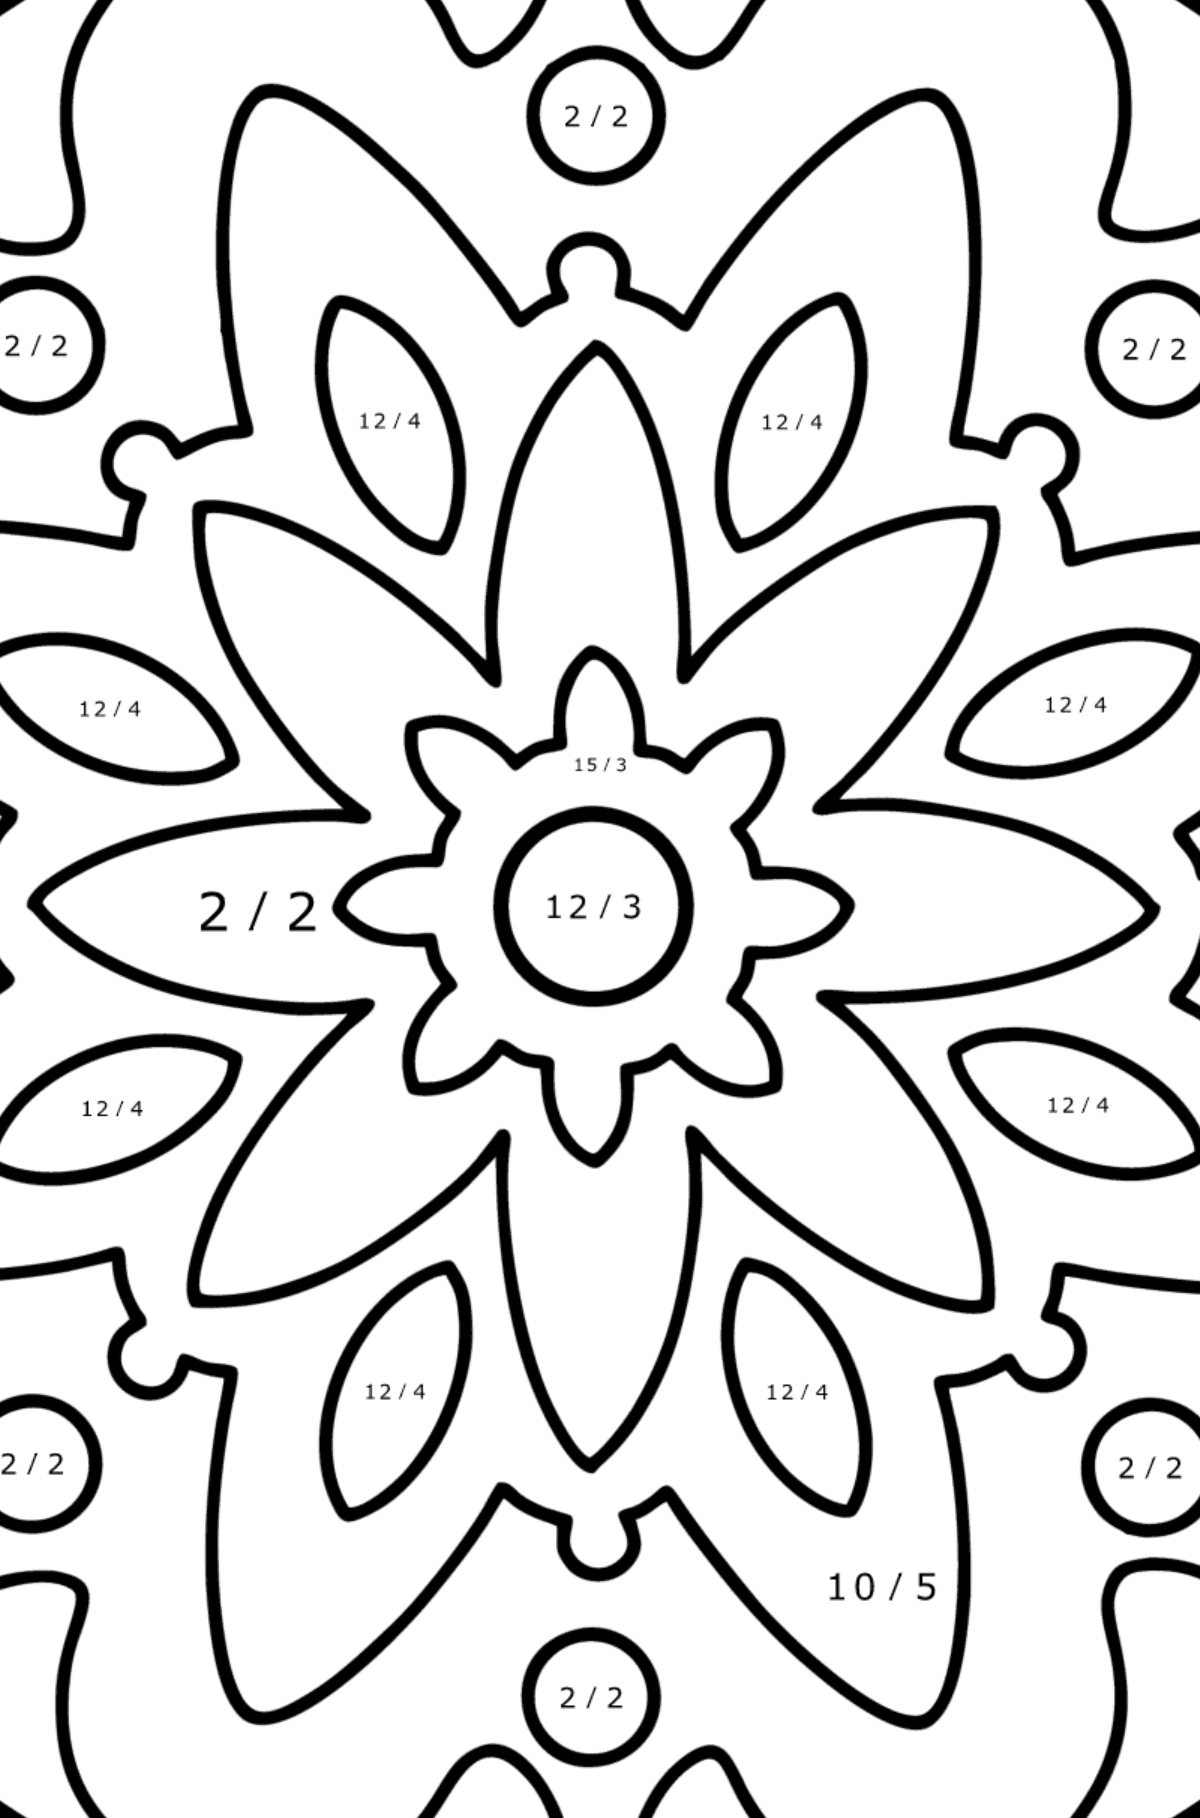 Mandala coloring page - 22 elements - Math Coloring - Division for Kids